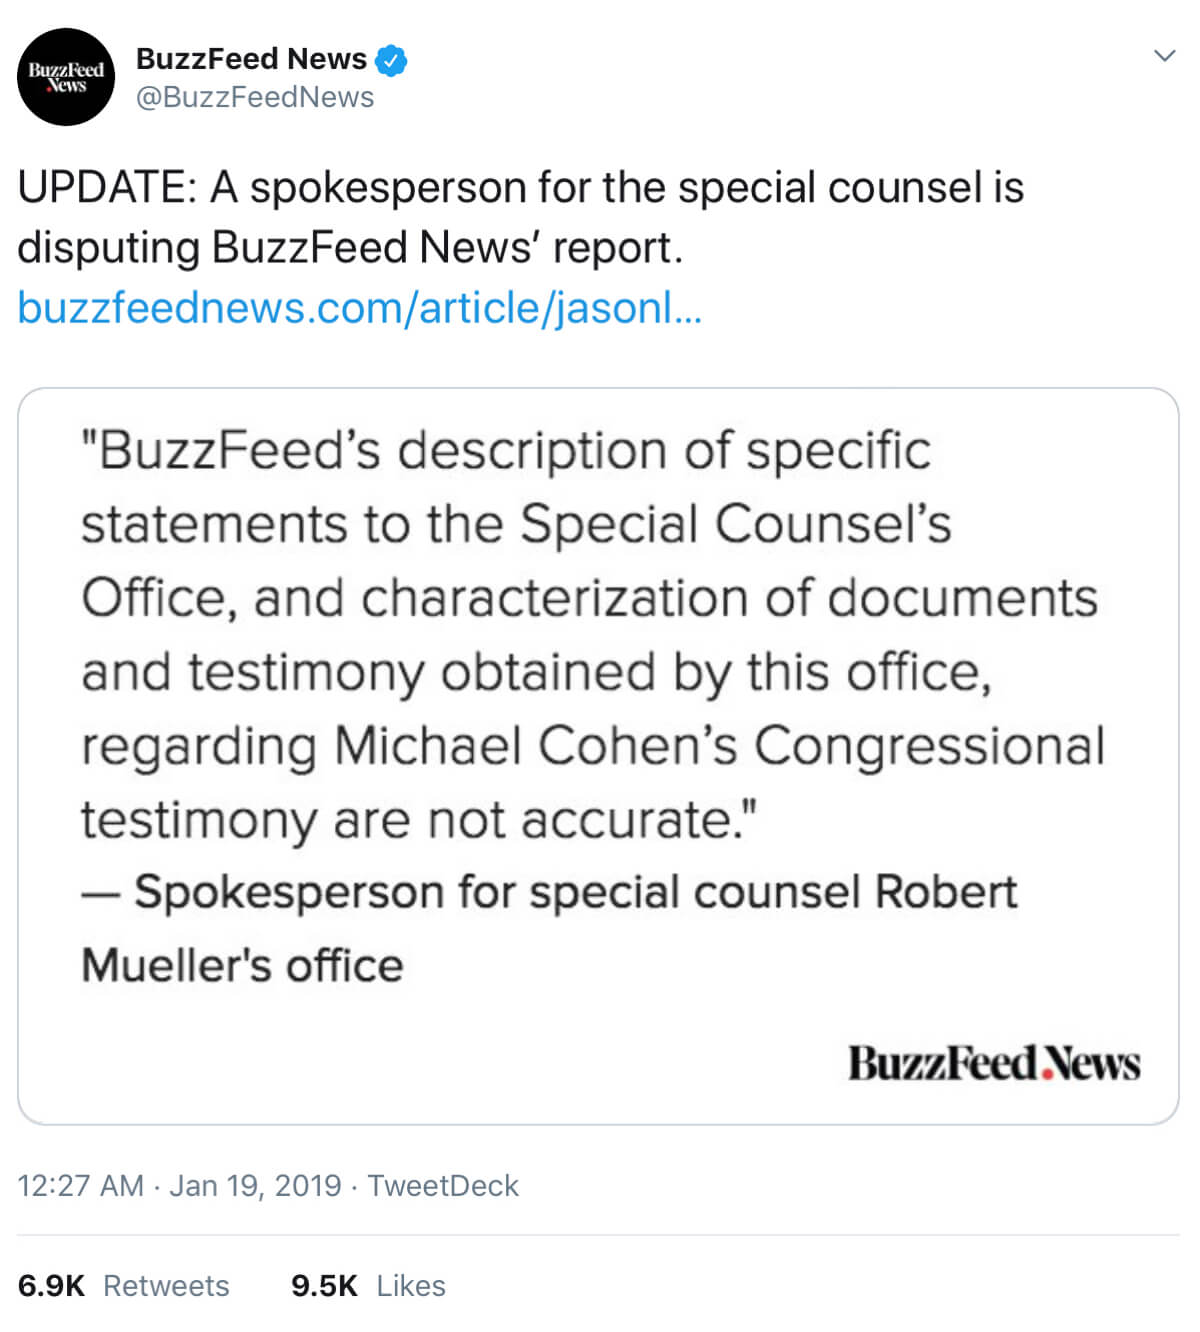 A tweet from BuzzFeed News explaining that a special spokesperson for the special counsel is disputing one of its reports.